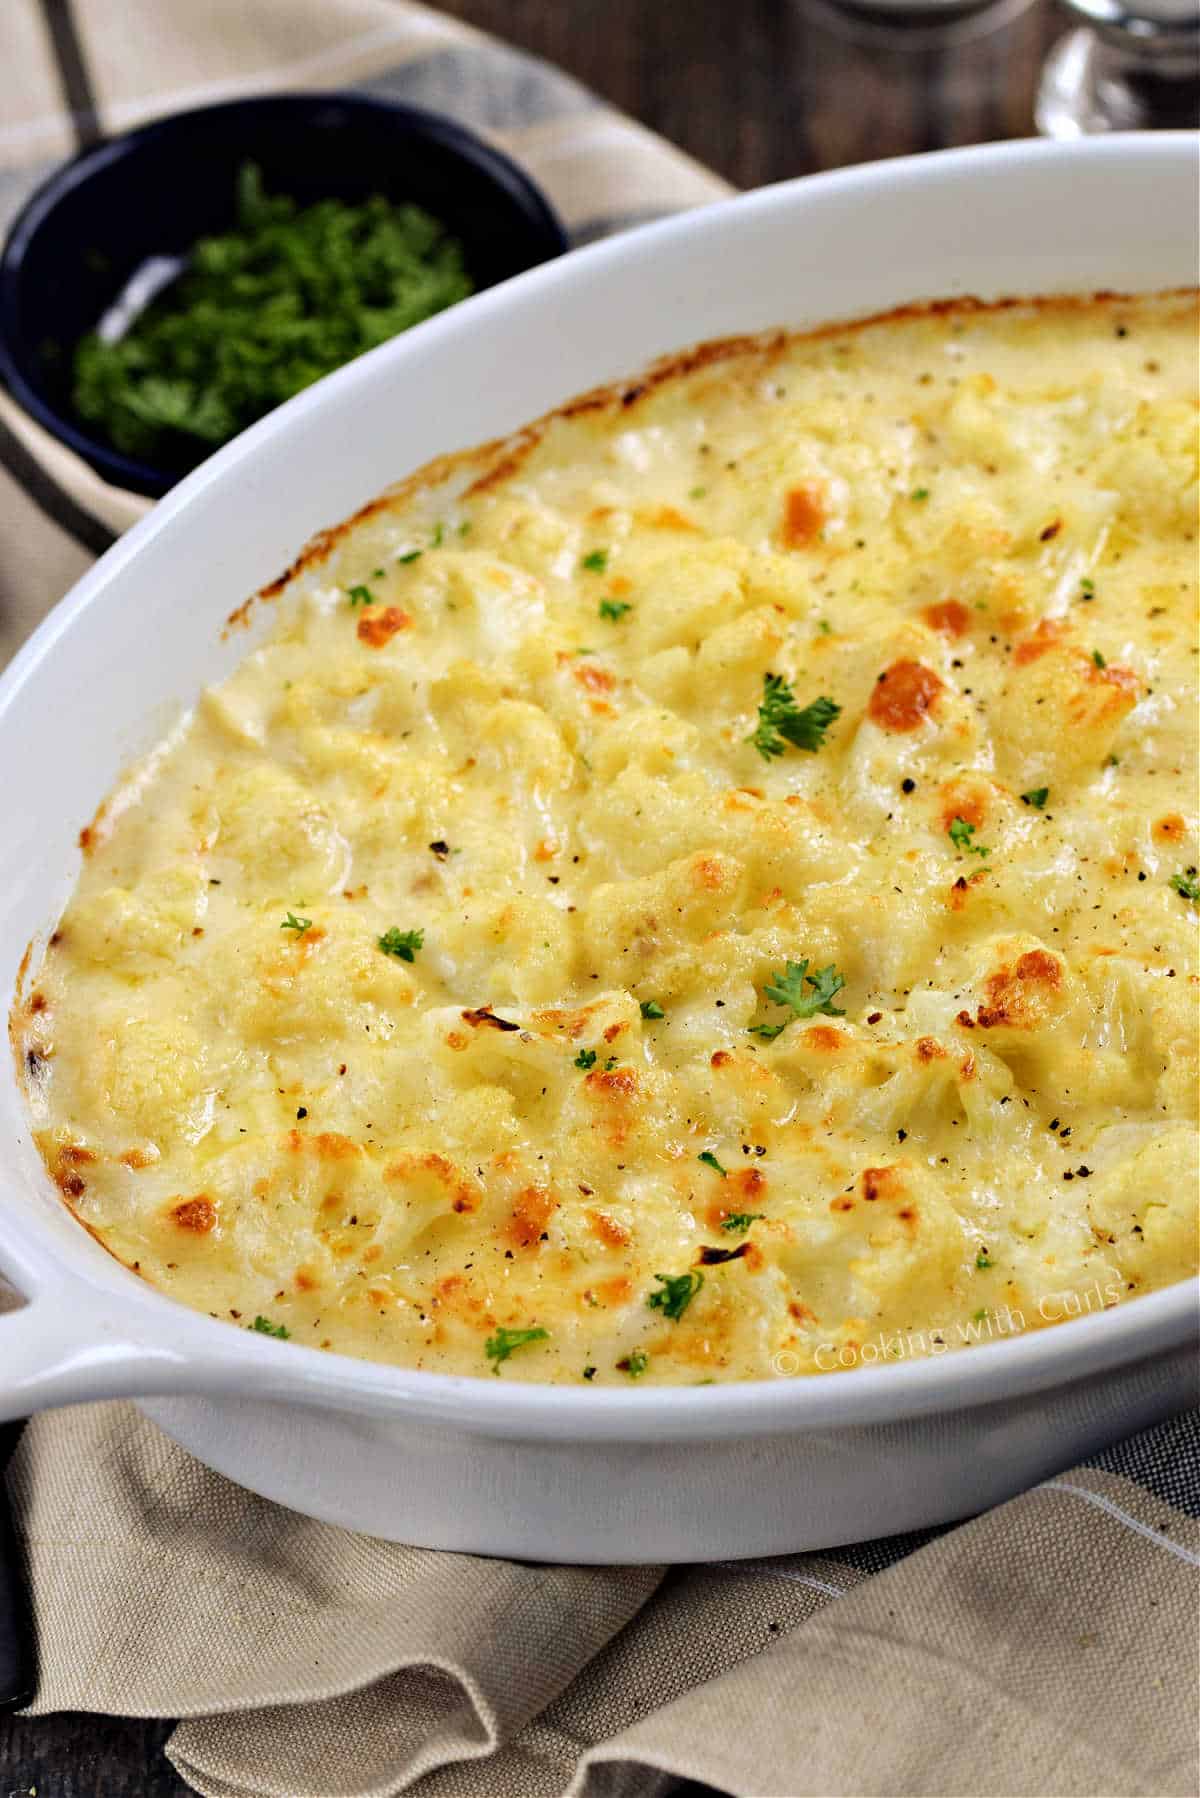 Cauliflower in cheese sauce baked in an oval baking dish.